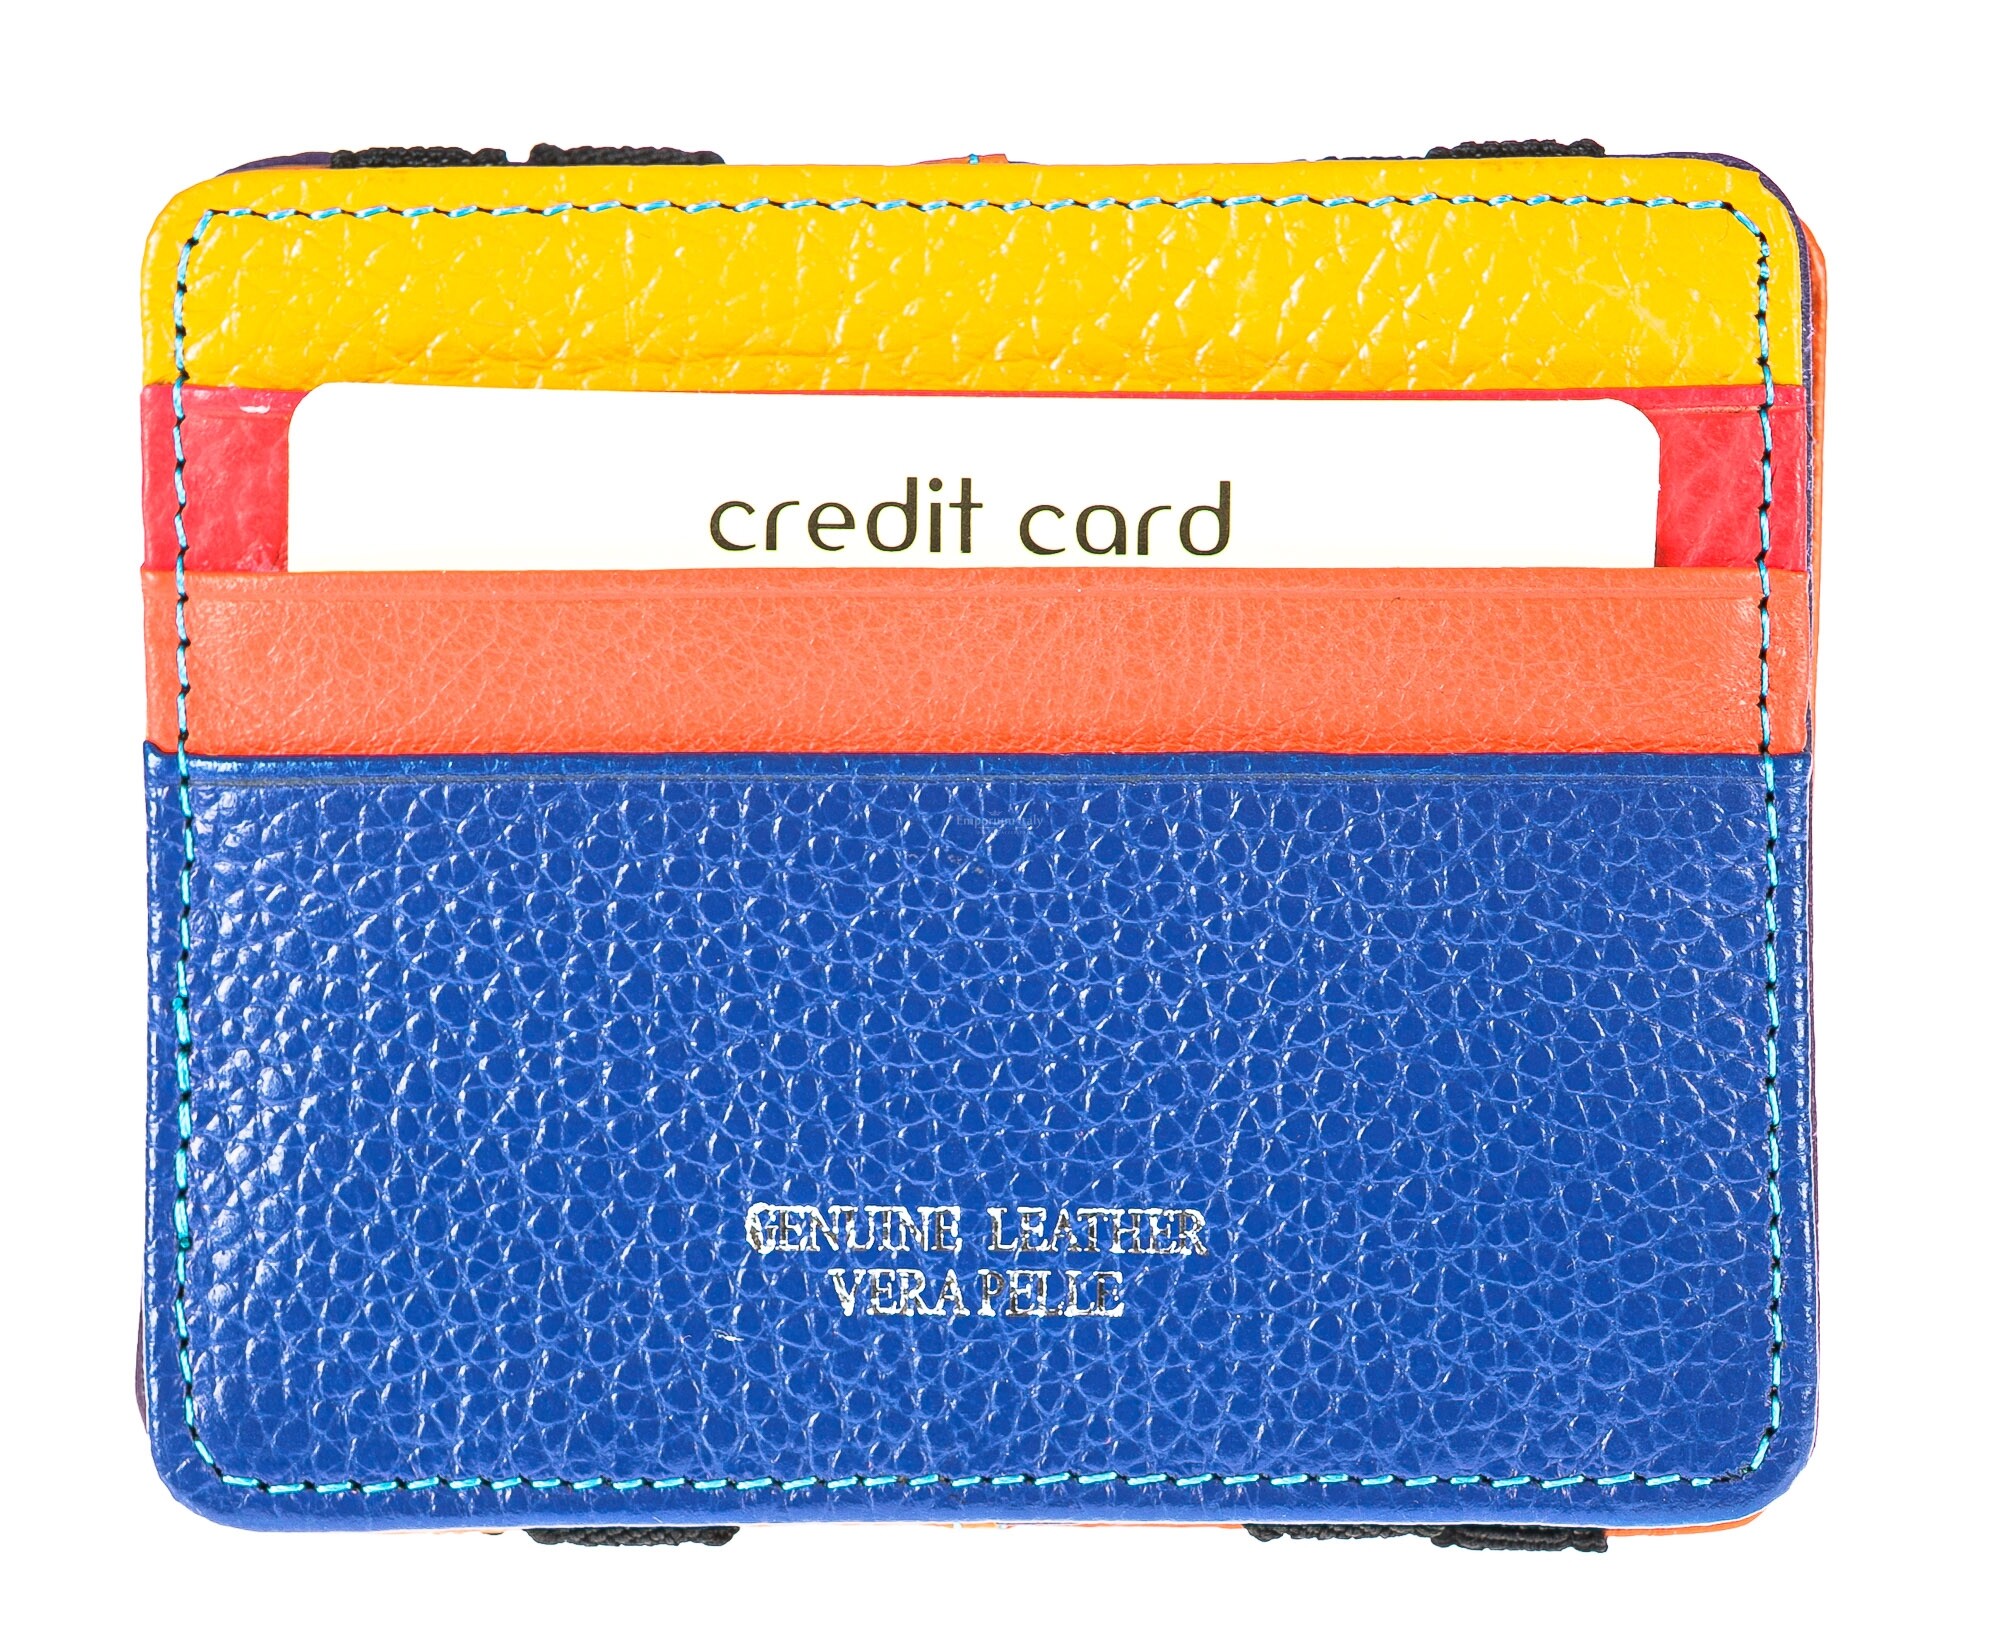 Genuine leather credit card holder with coin holder unisex CROAZIA,  MULTICOLOUR/BLUE/ORANGE/YELLOW, CHIAROSCURO, LEATHER CREDIT CARDS